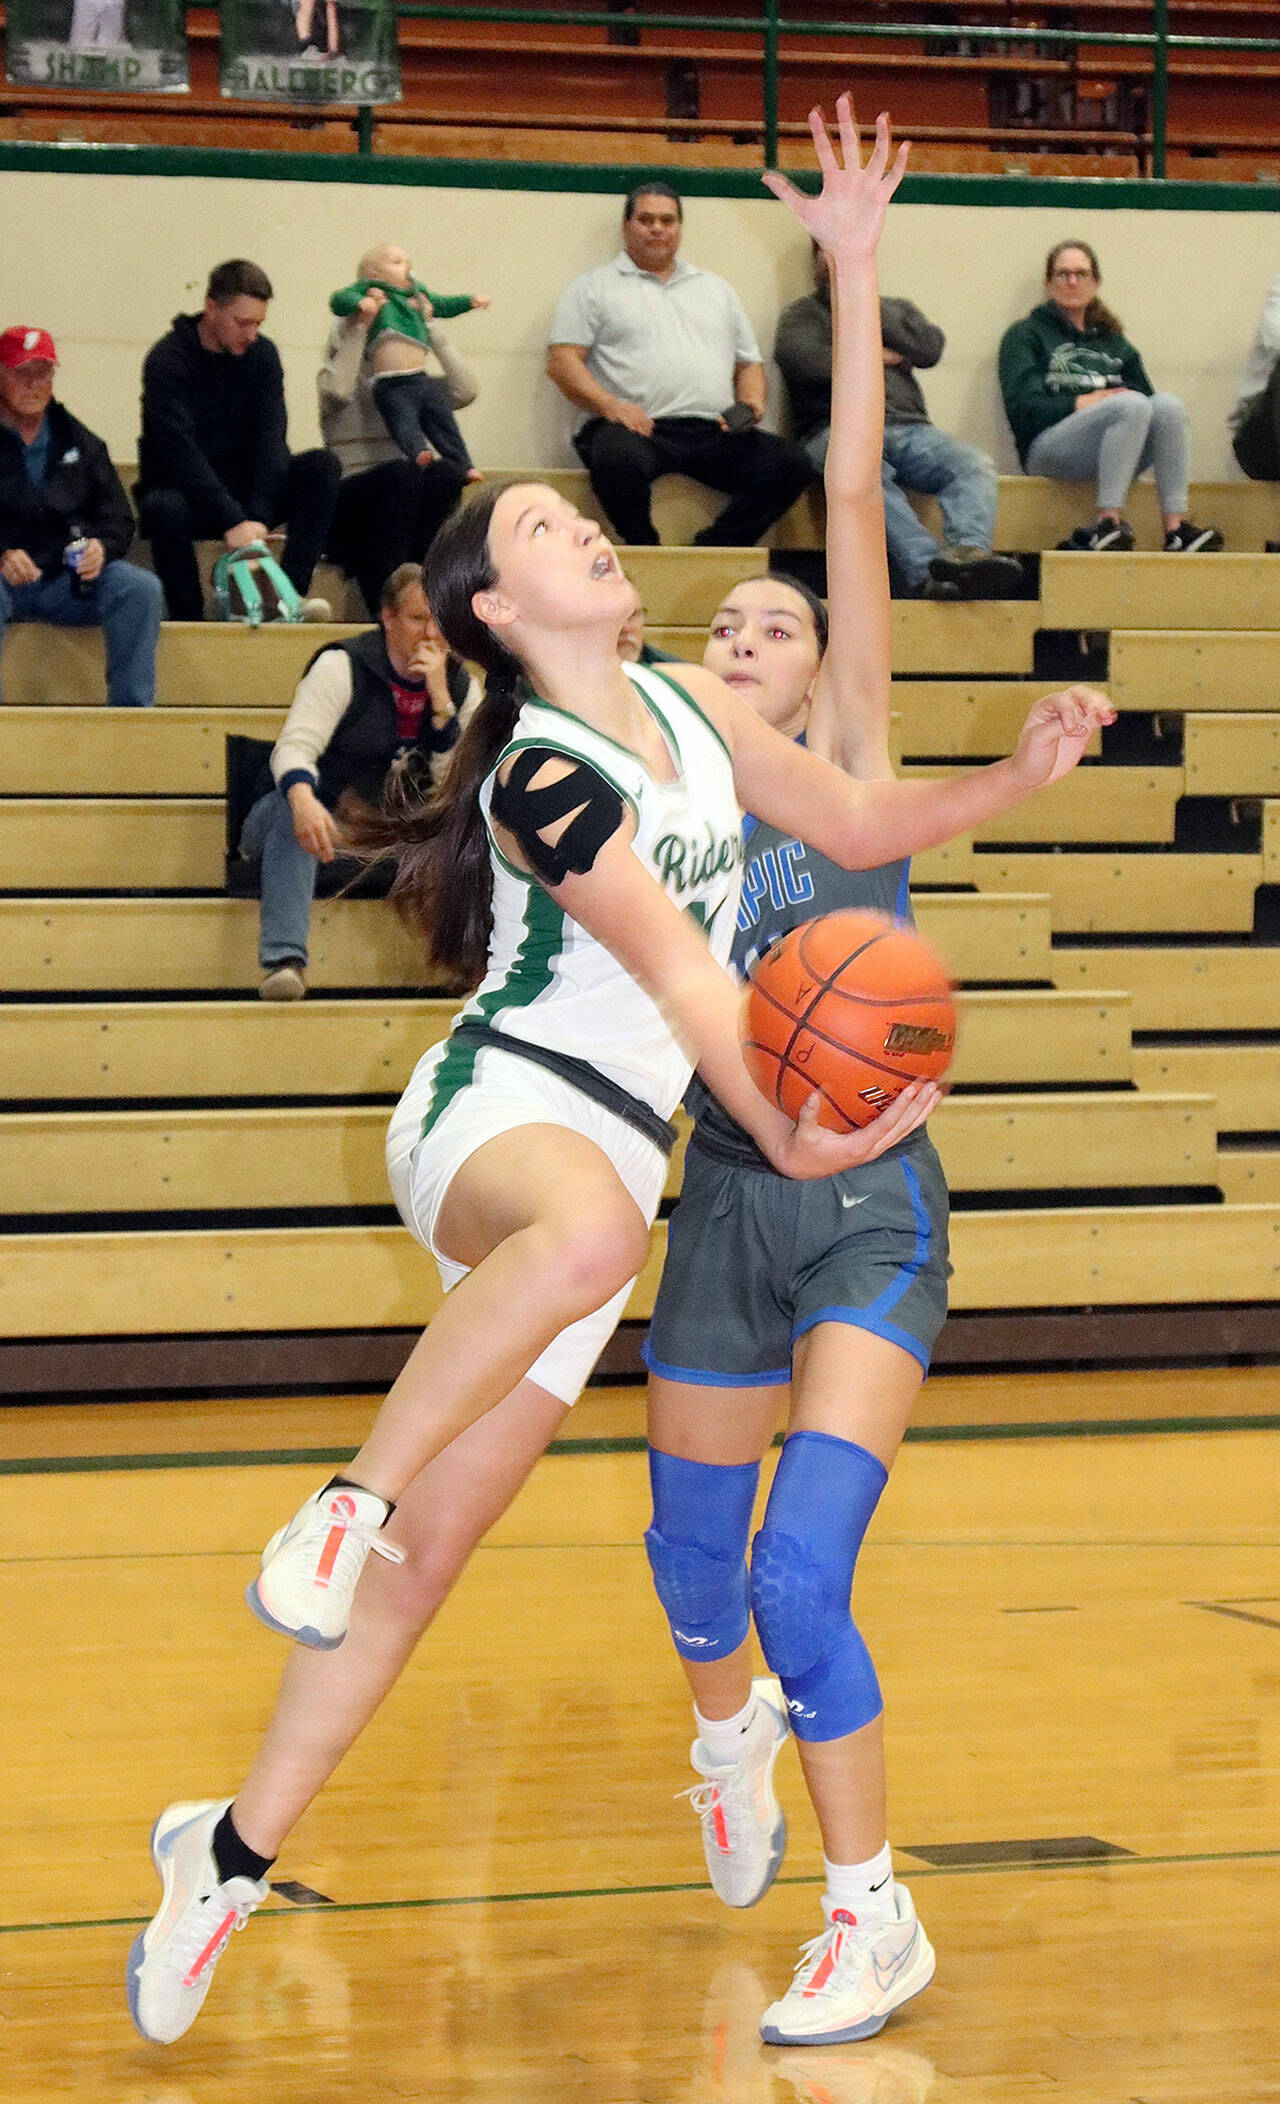 Dave Logan/for Peninsula Daily News Port Angeles’ Lindsay Smith attempts a reverse layup during the Roughriders’ 59-29 win over Olympic on Thursday in the Rider Gymnasium.